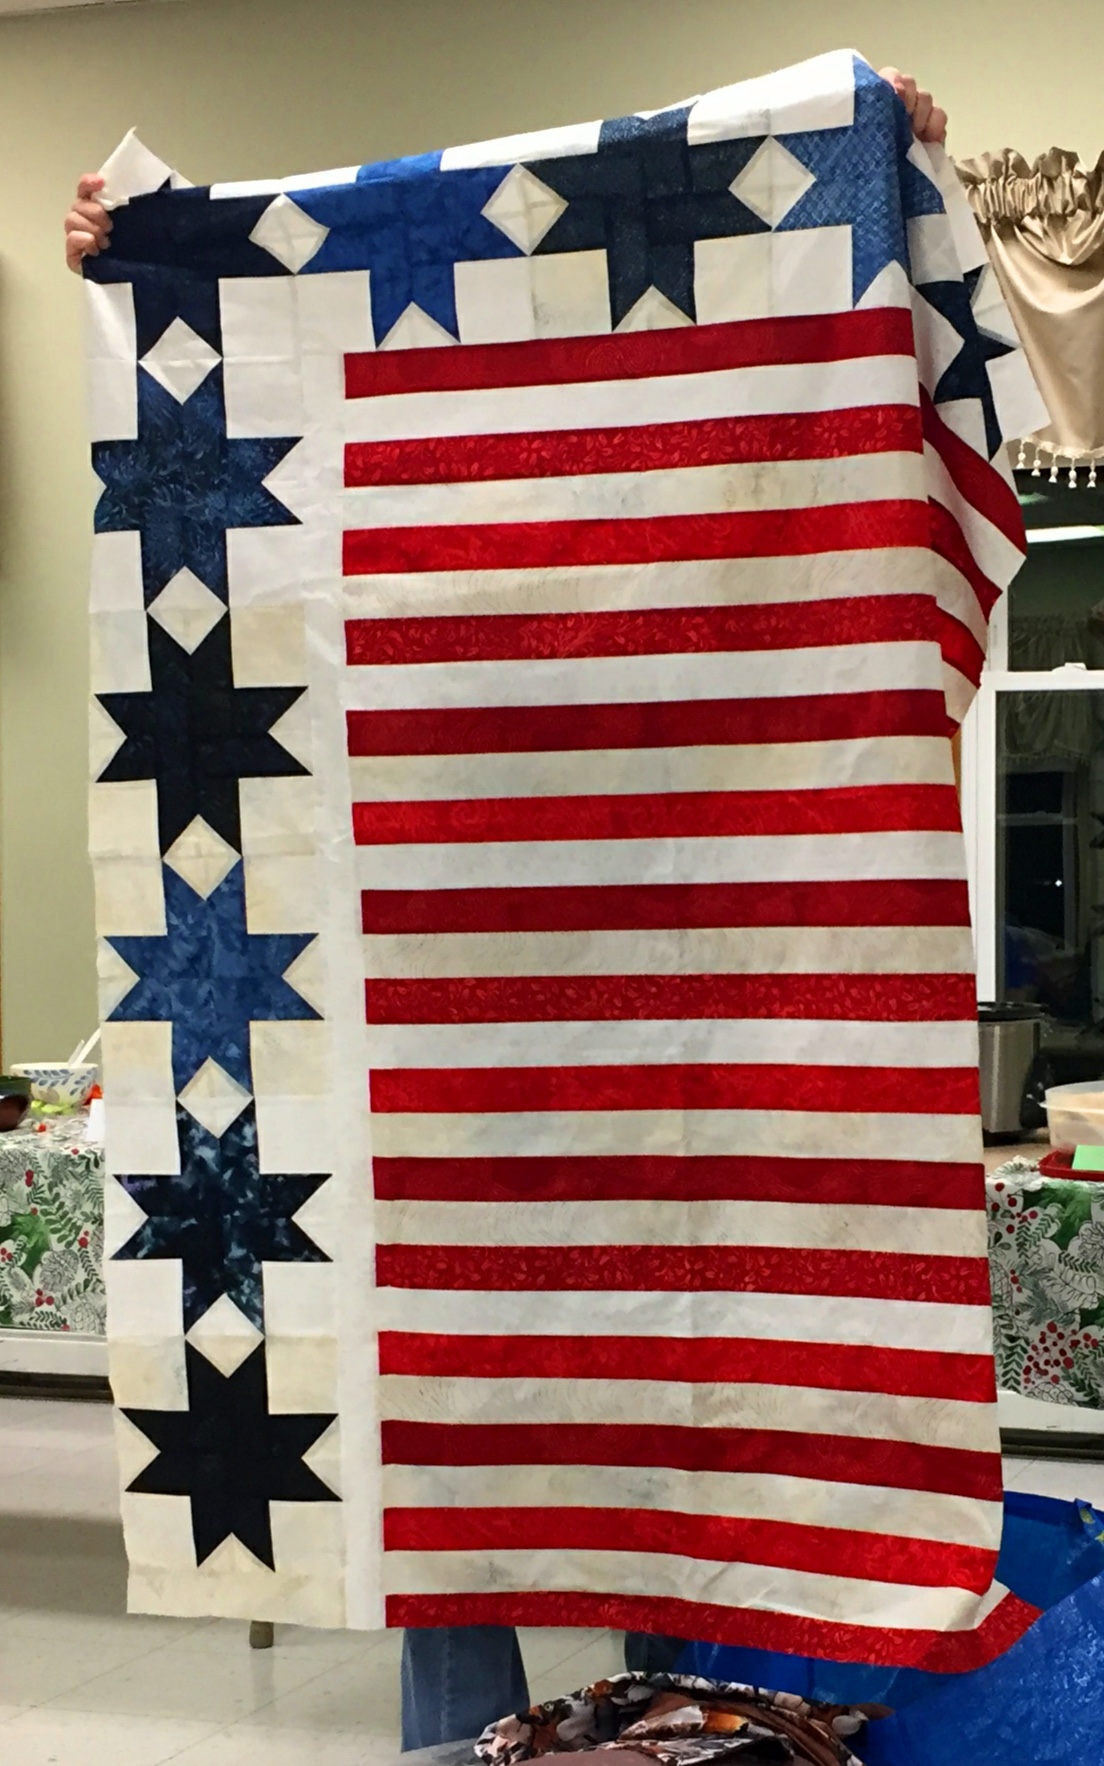 Kathy's Stars and Stripes Quilt